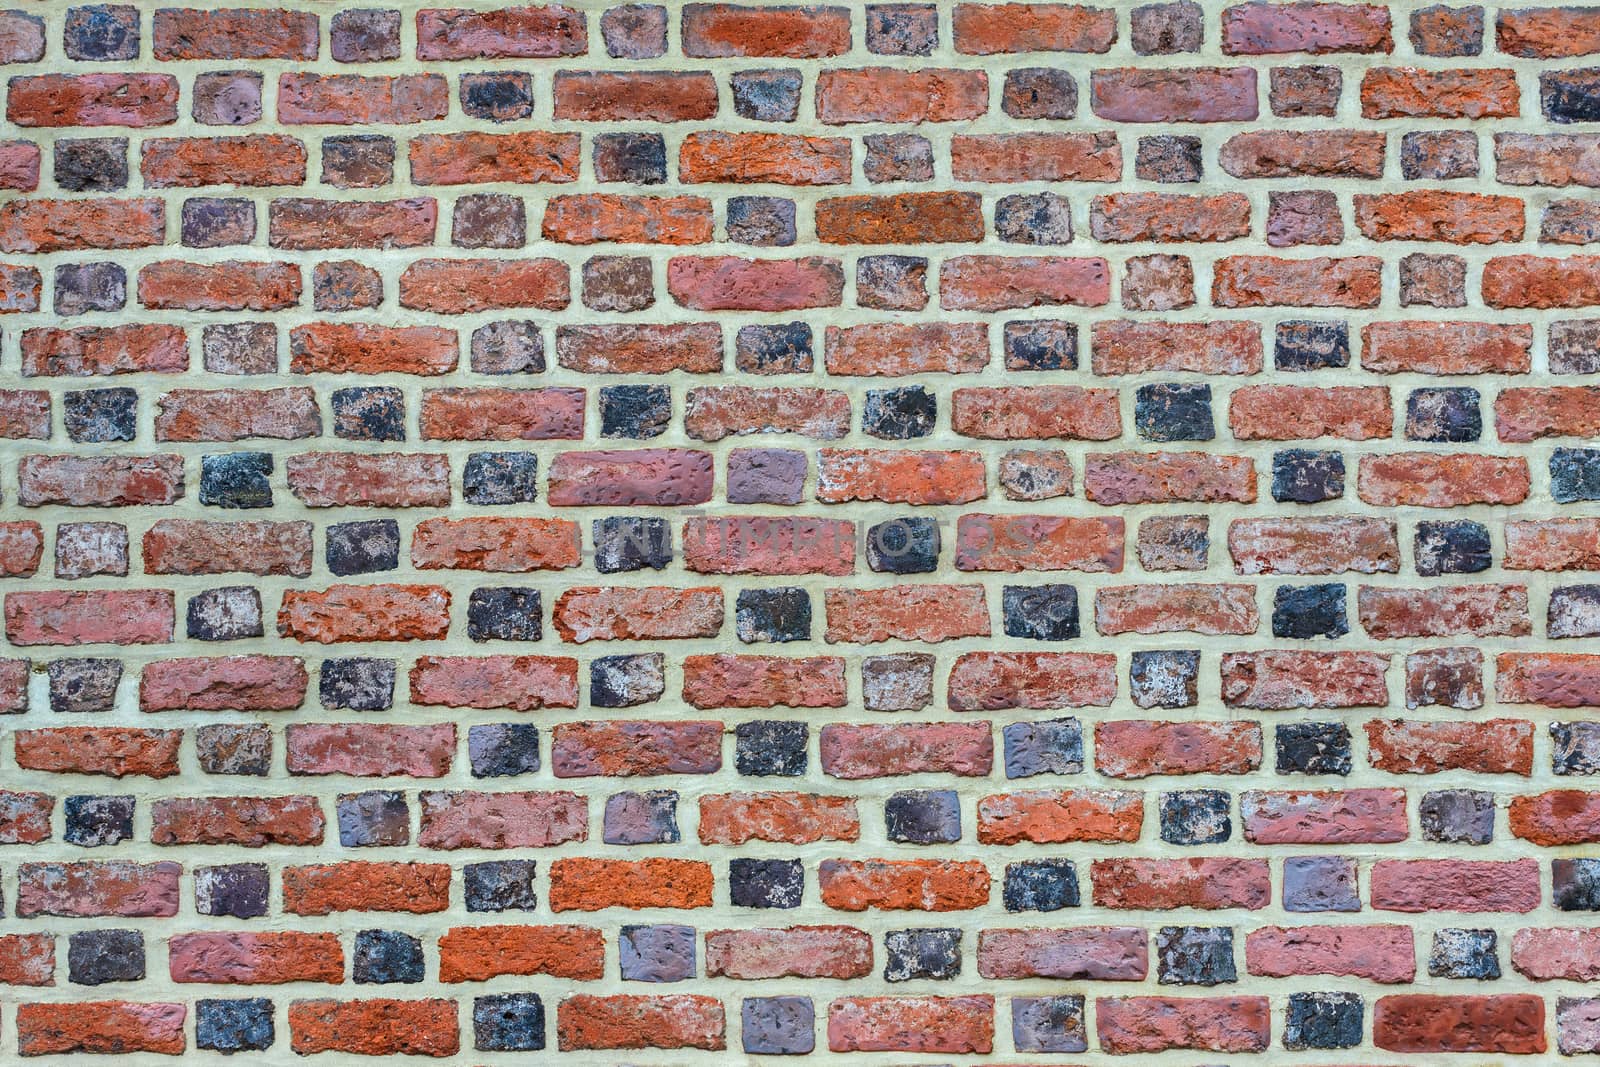 High quality picture of an old and archival brick wall